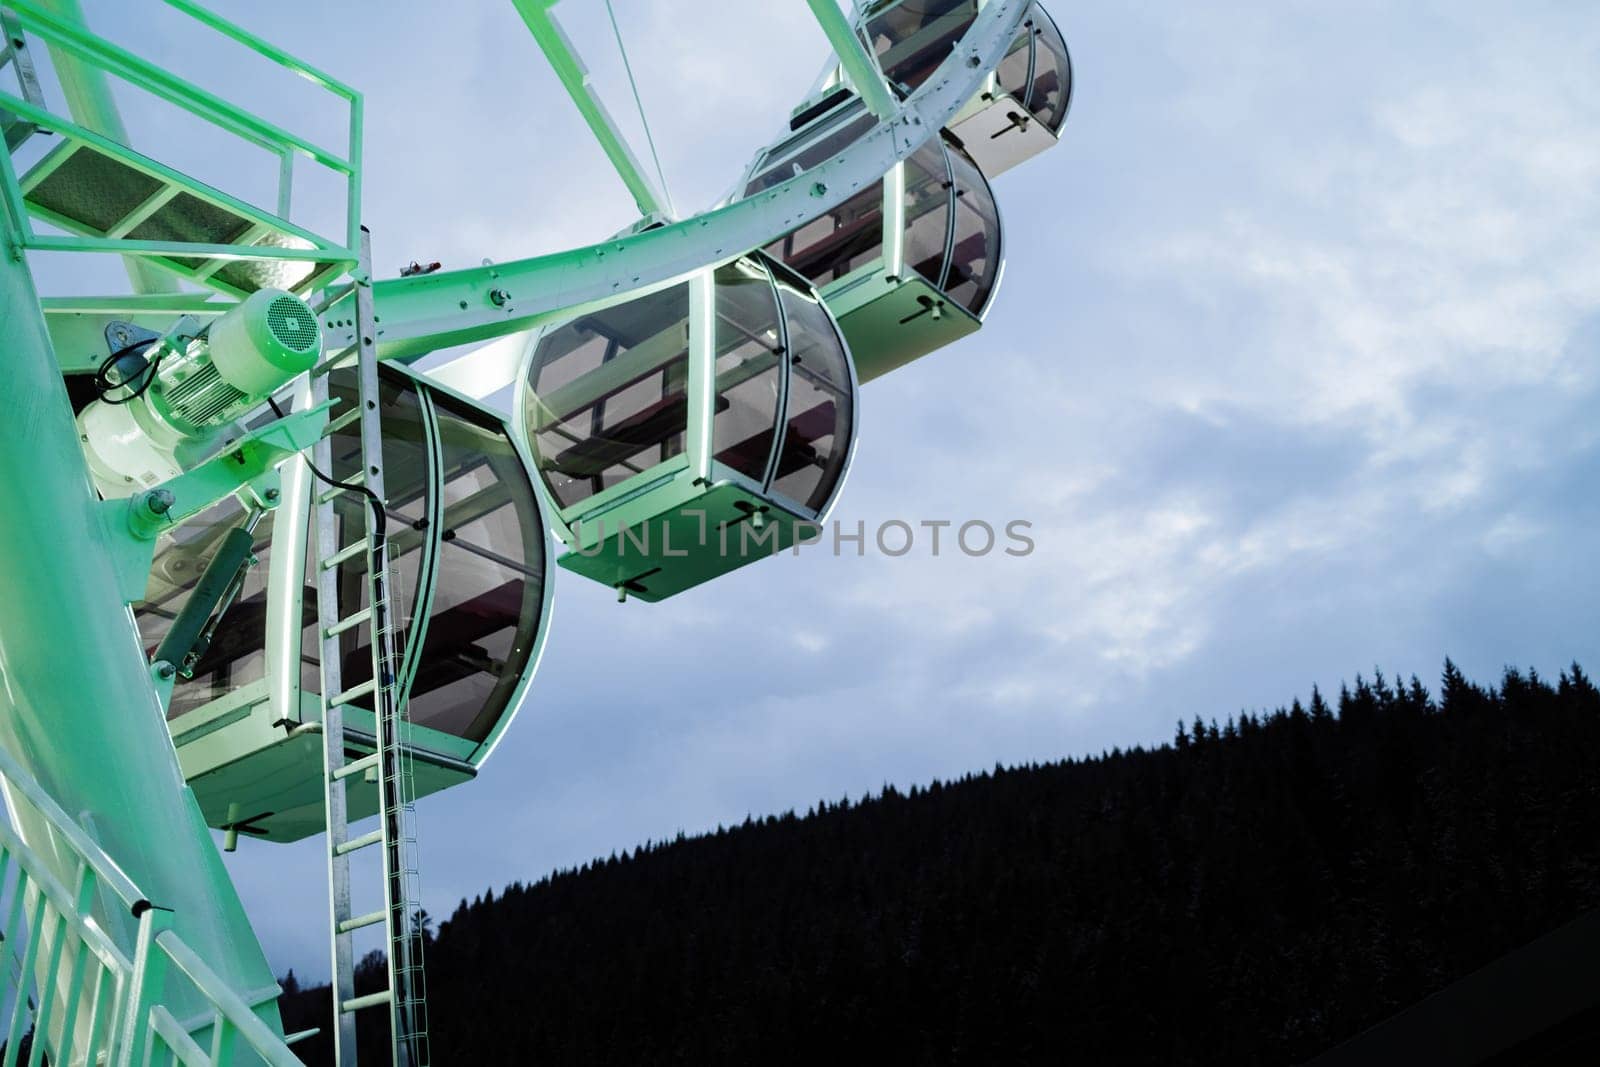 Modern colorful ferris wheel free cabins over evening sky at amusement park. High quality photo